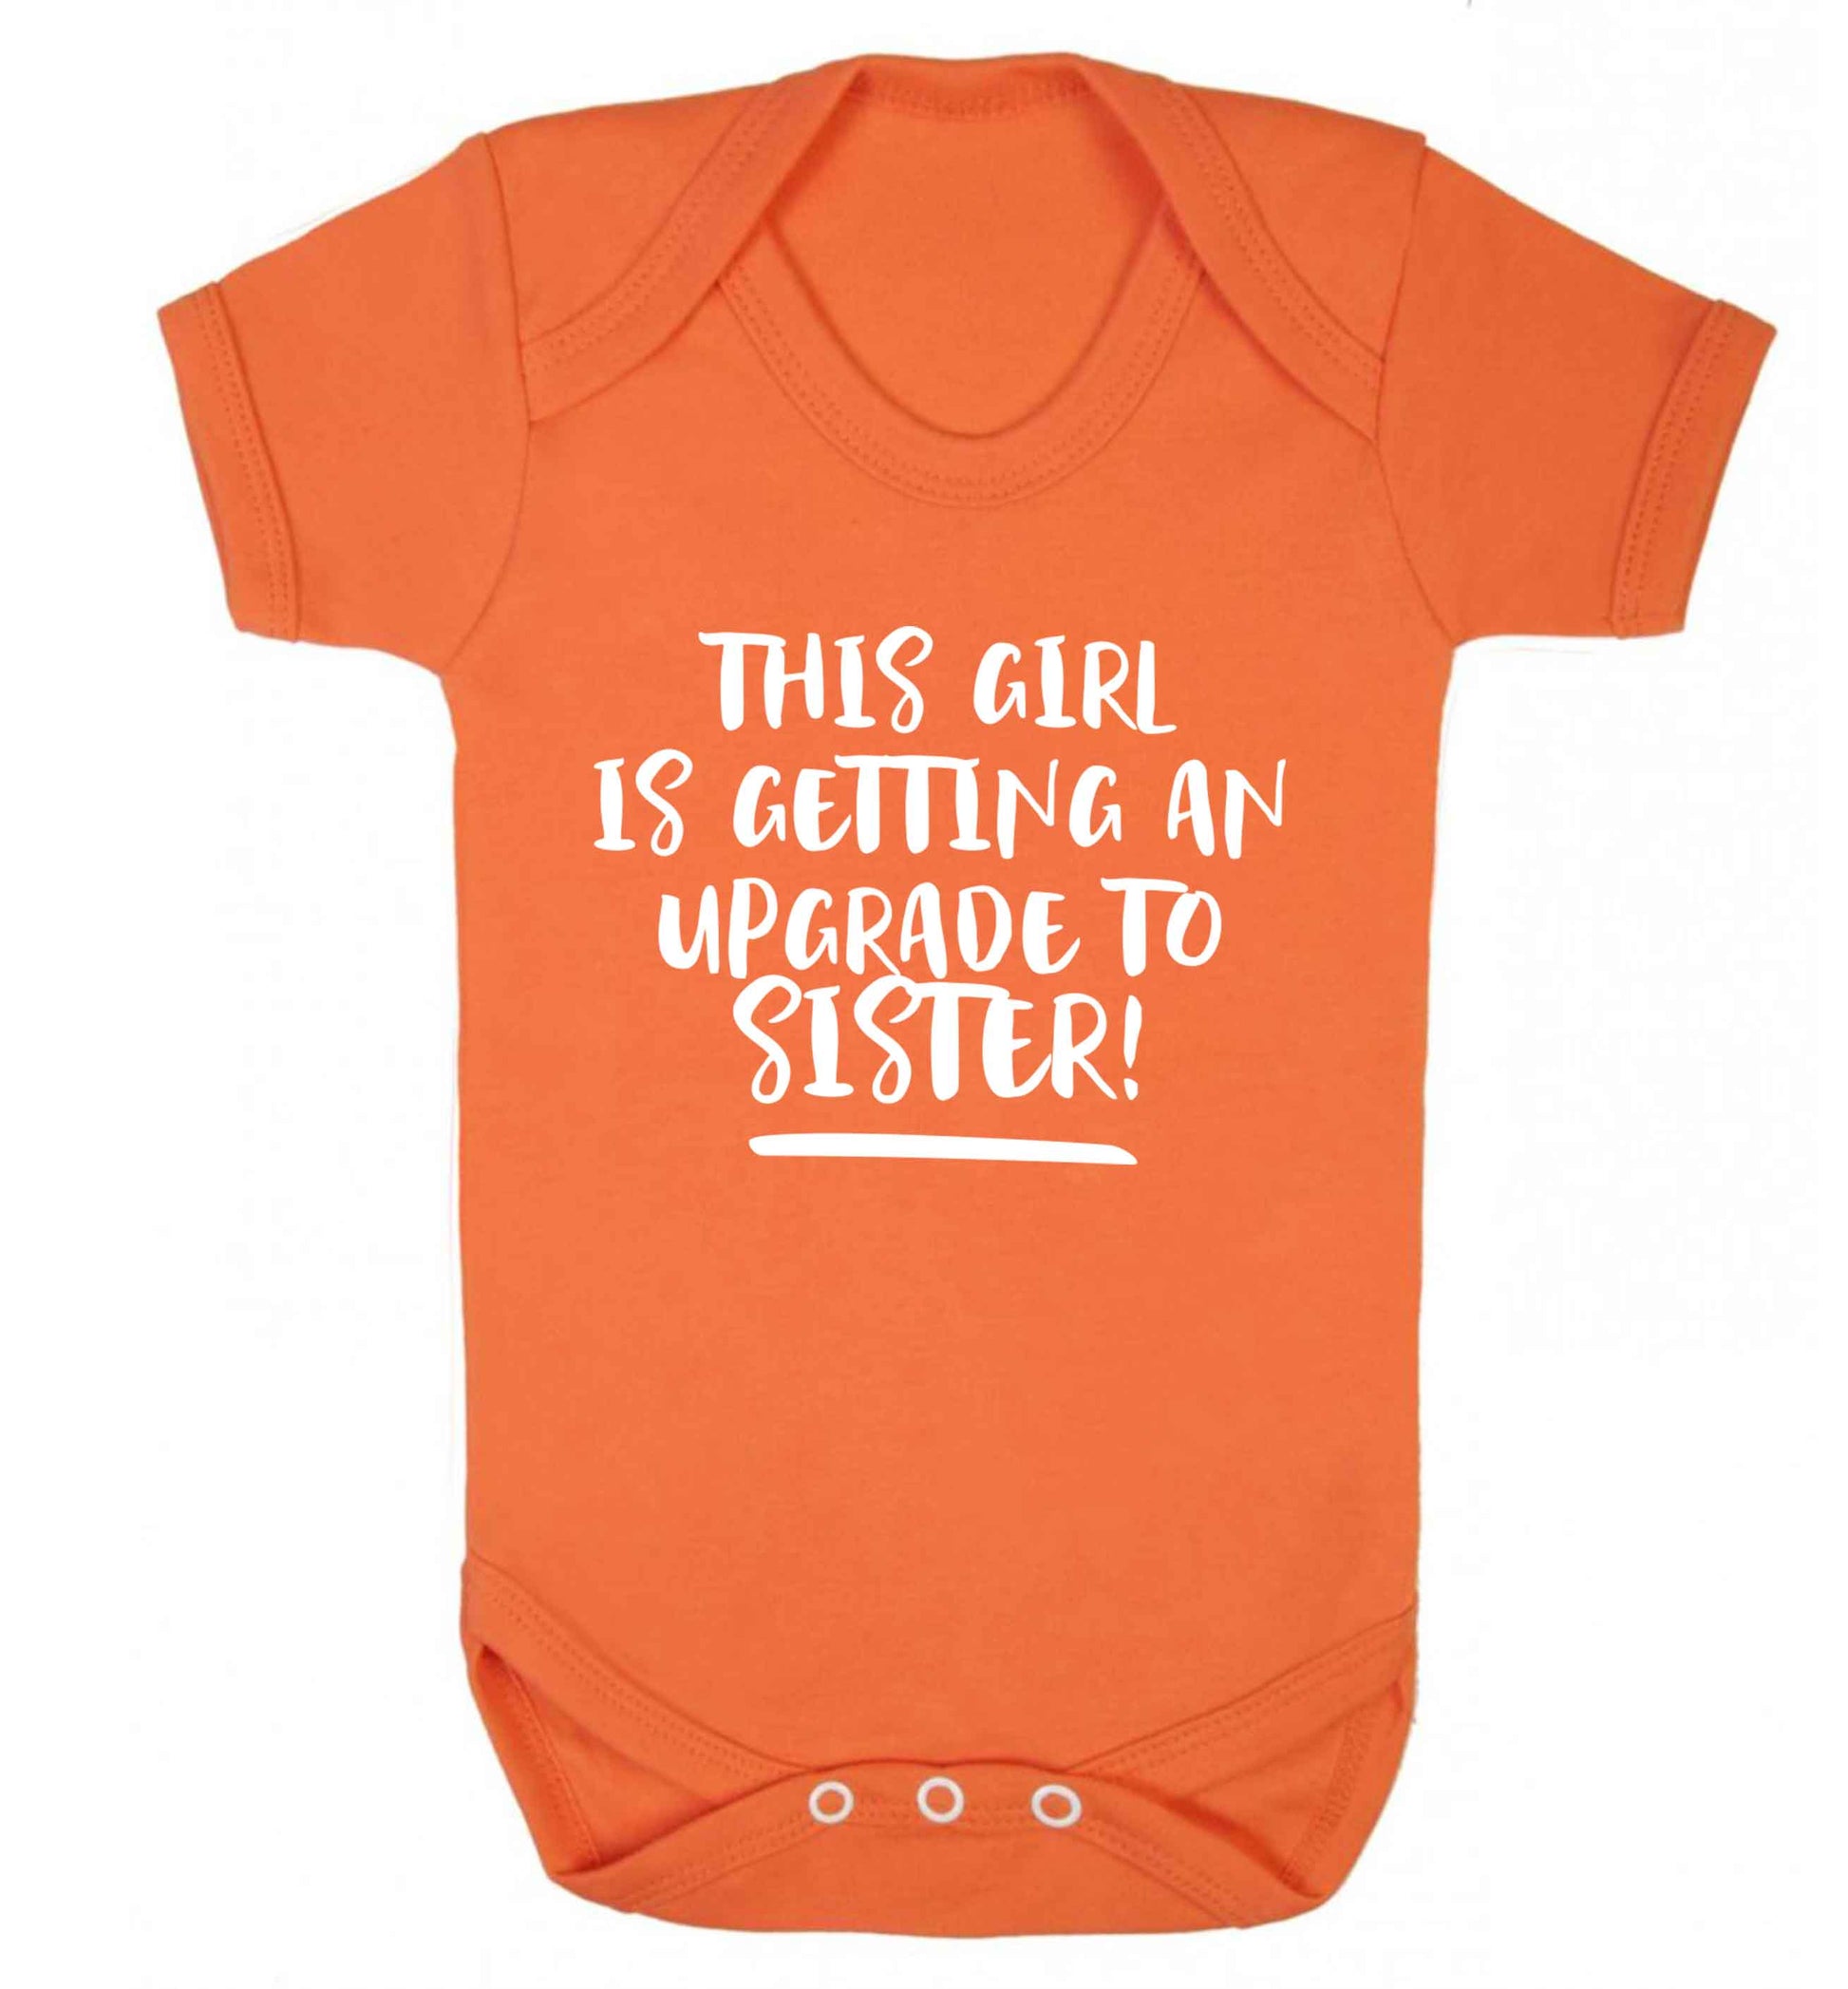 This girl is getting an upgrade to sister! Baby Vest orange 18-24 months